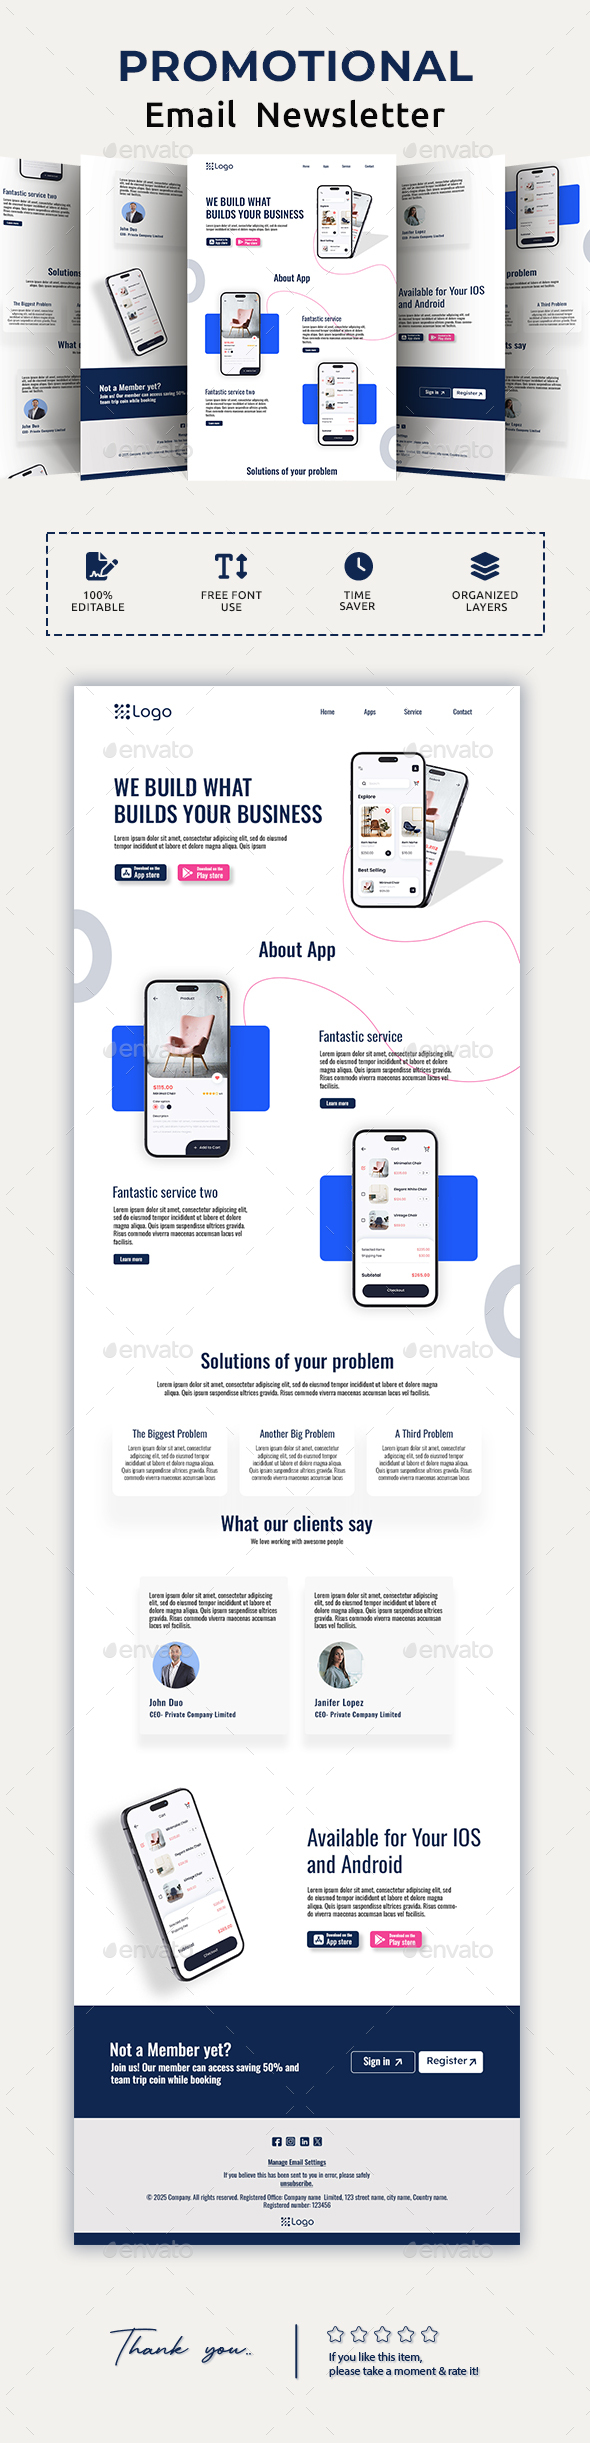 Mobile Apps Email Newsletter PSD Template